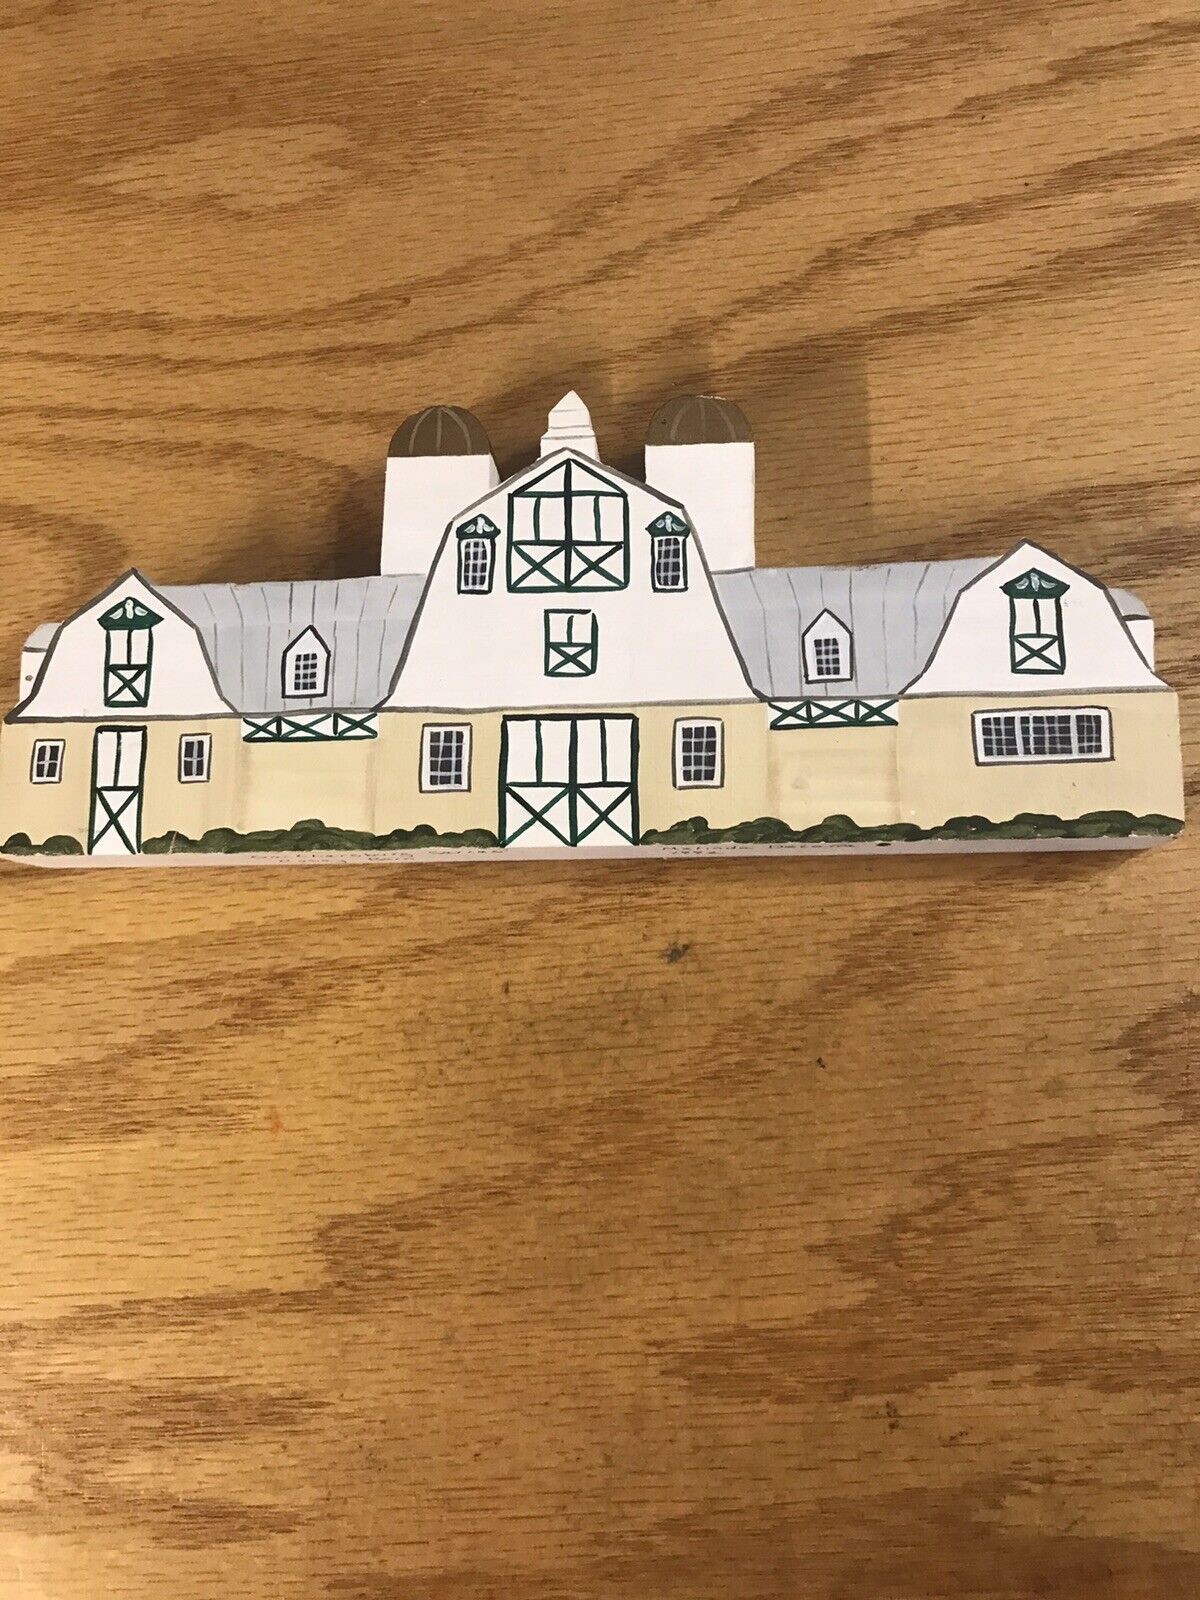 Casey Barn, Gaithersburg, MD 1992 Hand Painted by Melinda DeLalla